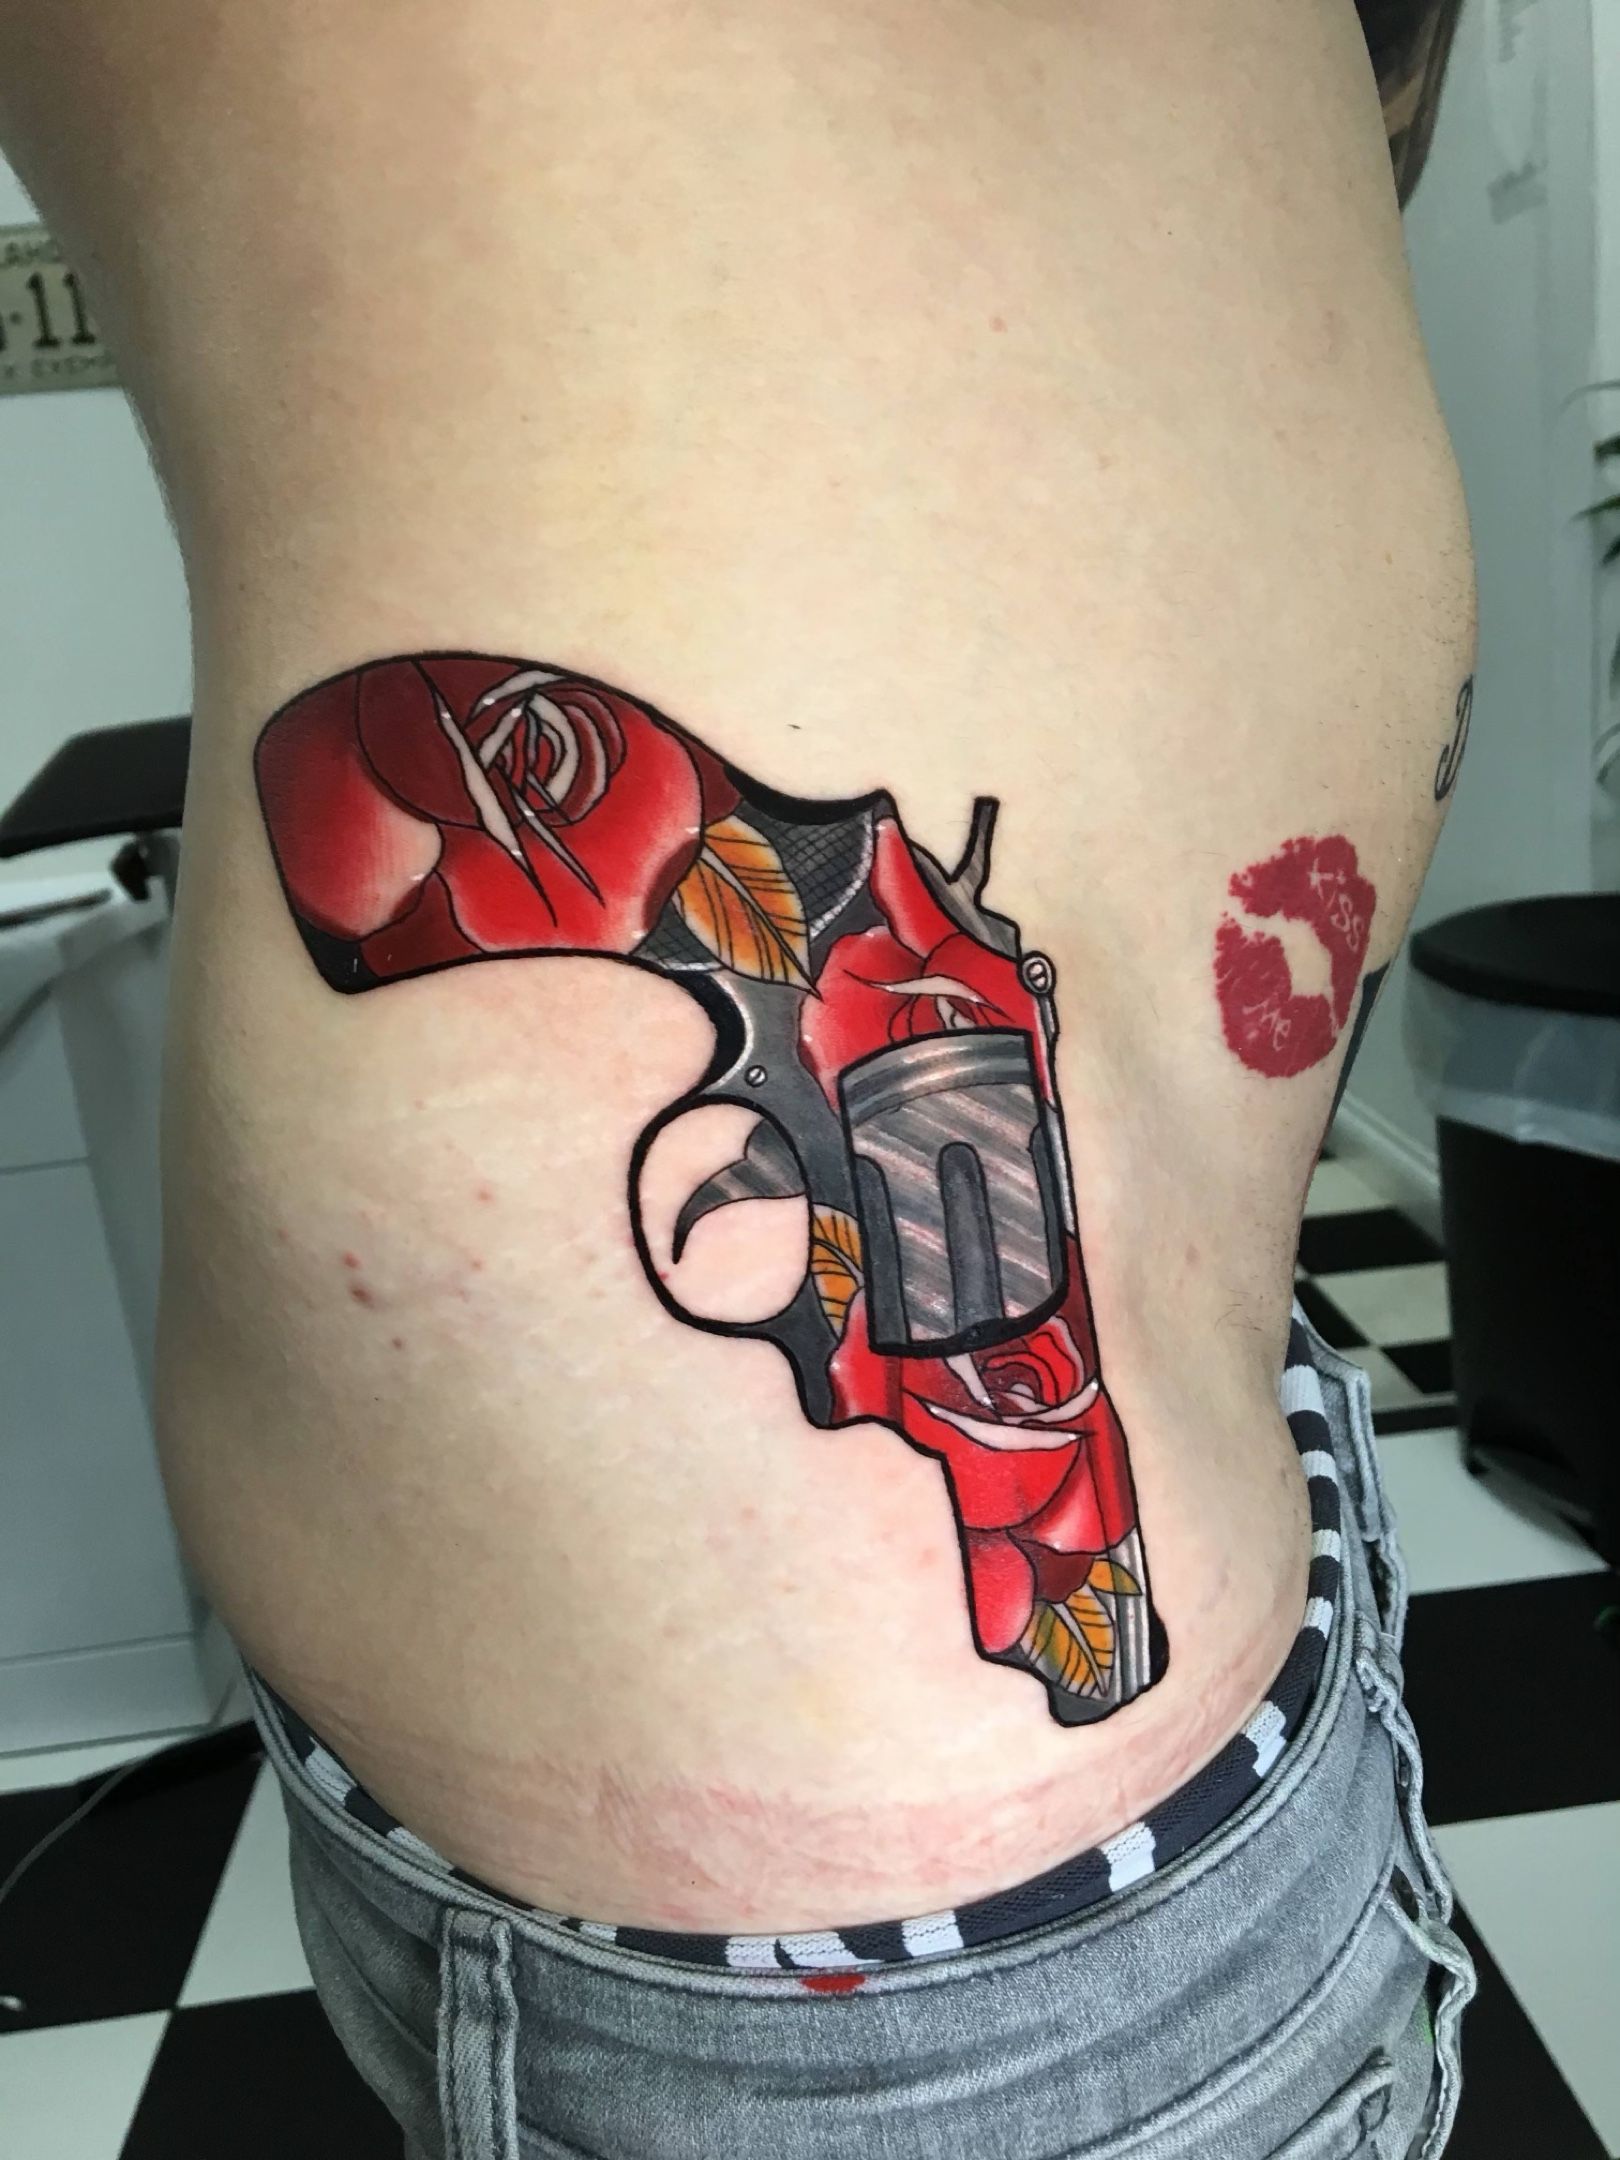 Discover more than 57 glock 19 tattoo super hot  incdgdbentre